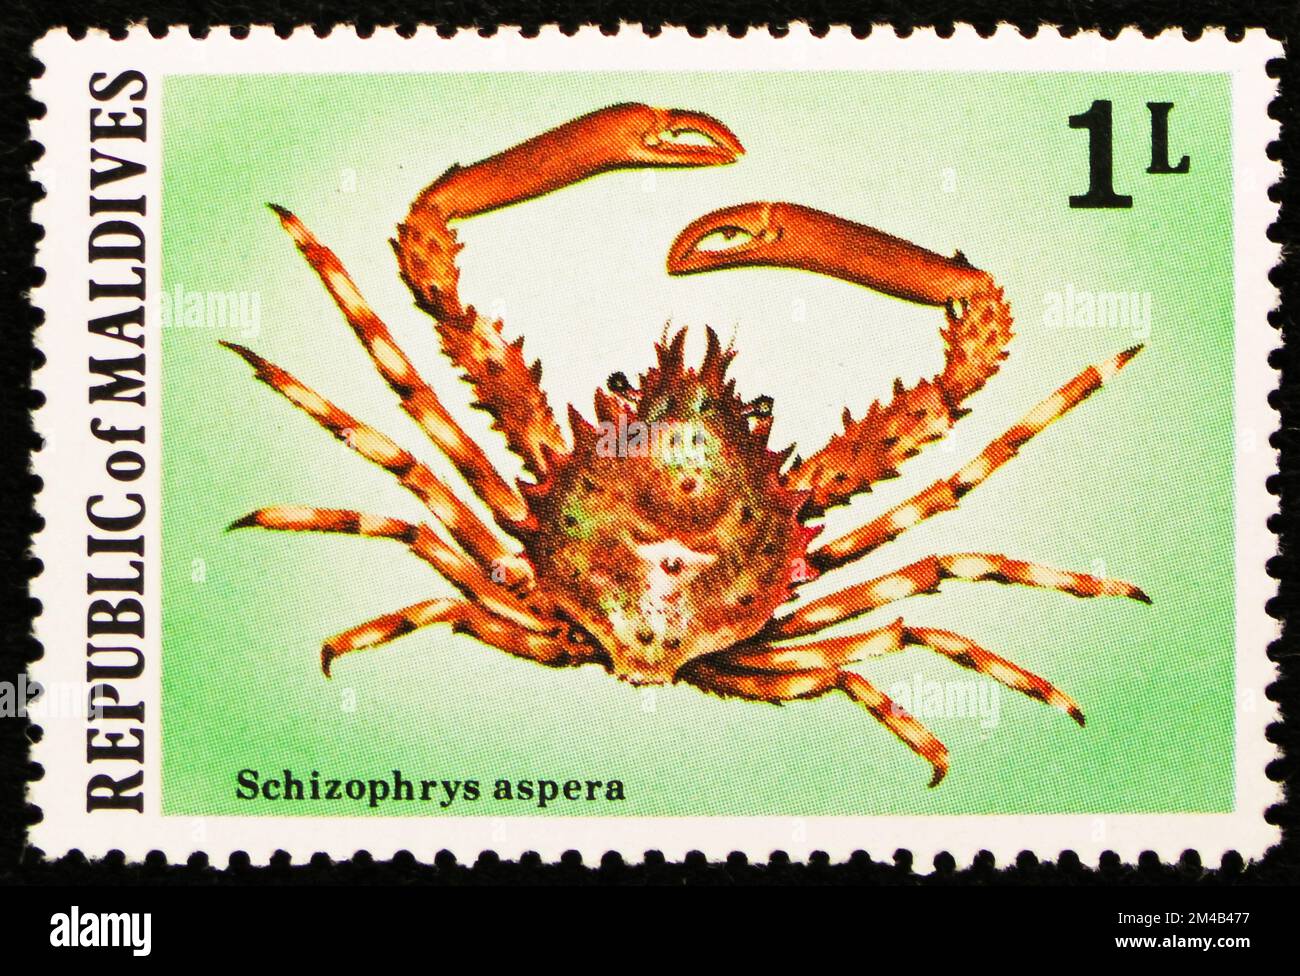 MOSCOW, RUSSIA - OCTOBER 29, 2022: Postage stamp printed in Maldives shows Common Decorator Crab (Schizophrys aspera), Maldivian Crabs and Lobster ser Stock Photo